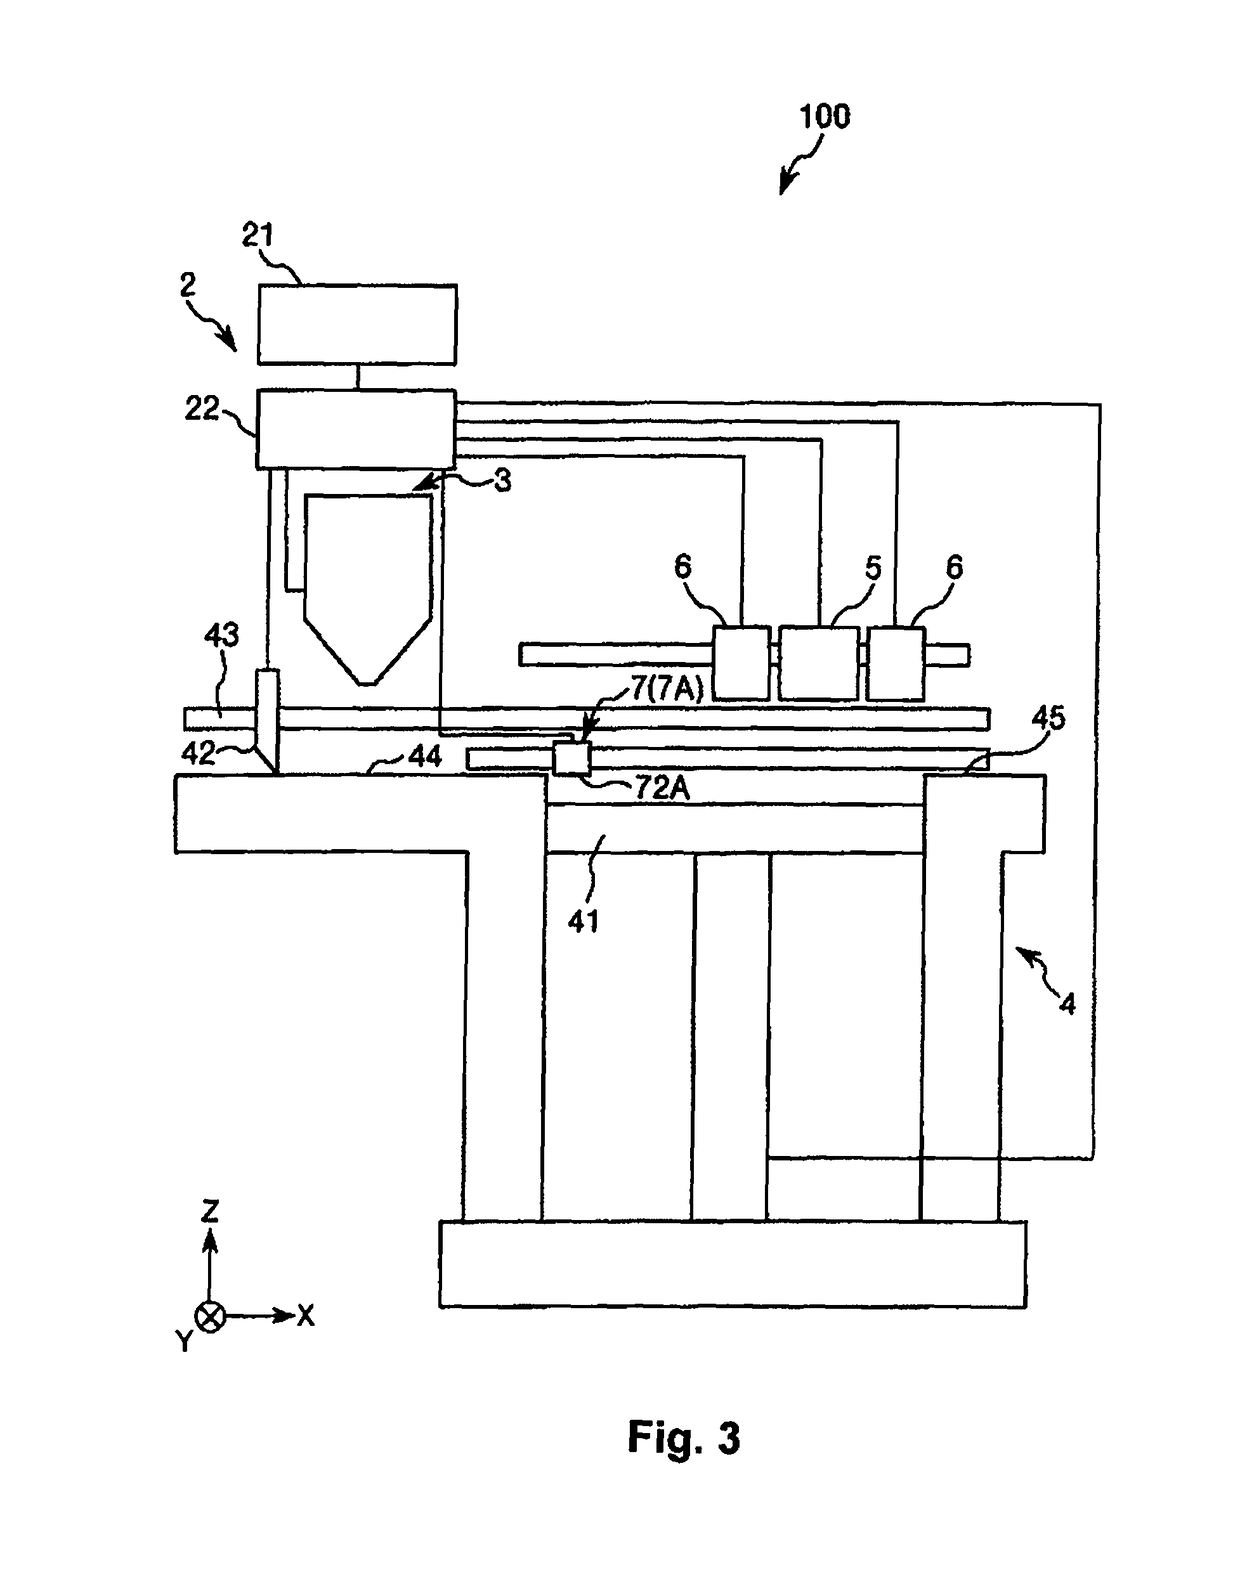 Three dimensional mold object manufacturing apparatus, method for manufacturing three dimensional mold object, and three dimensional mold object